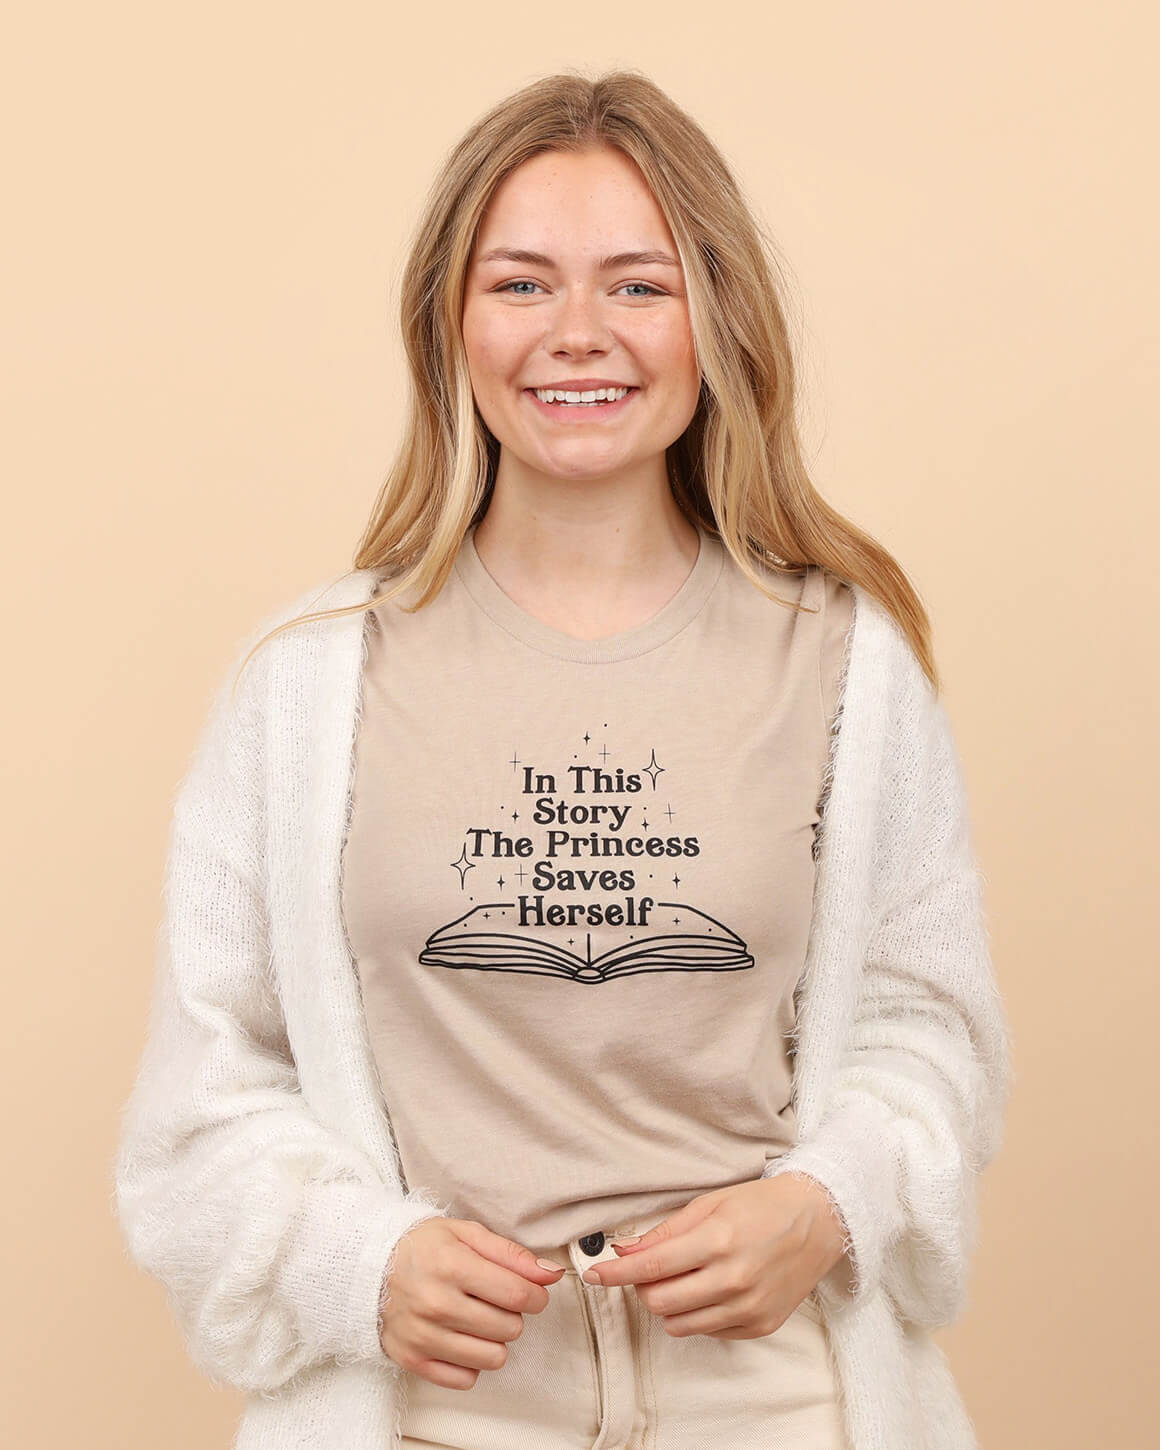 Smiling model in a tan t-shirt with a feminist graphic design